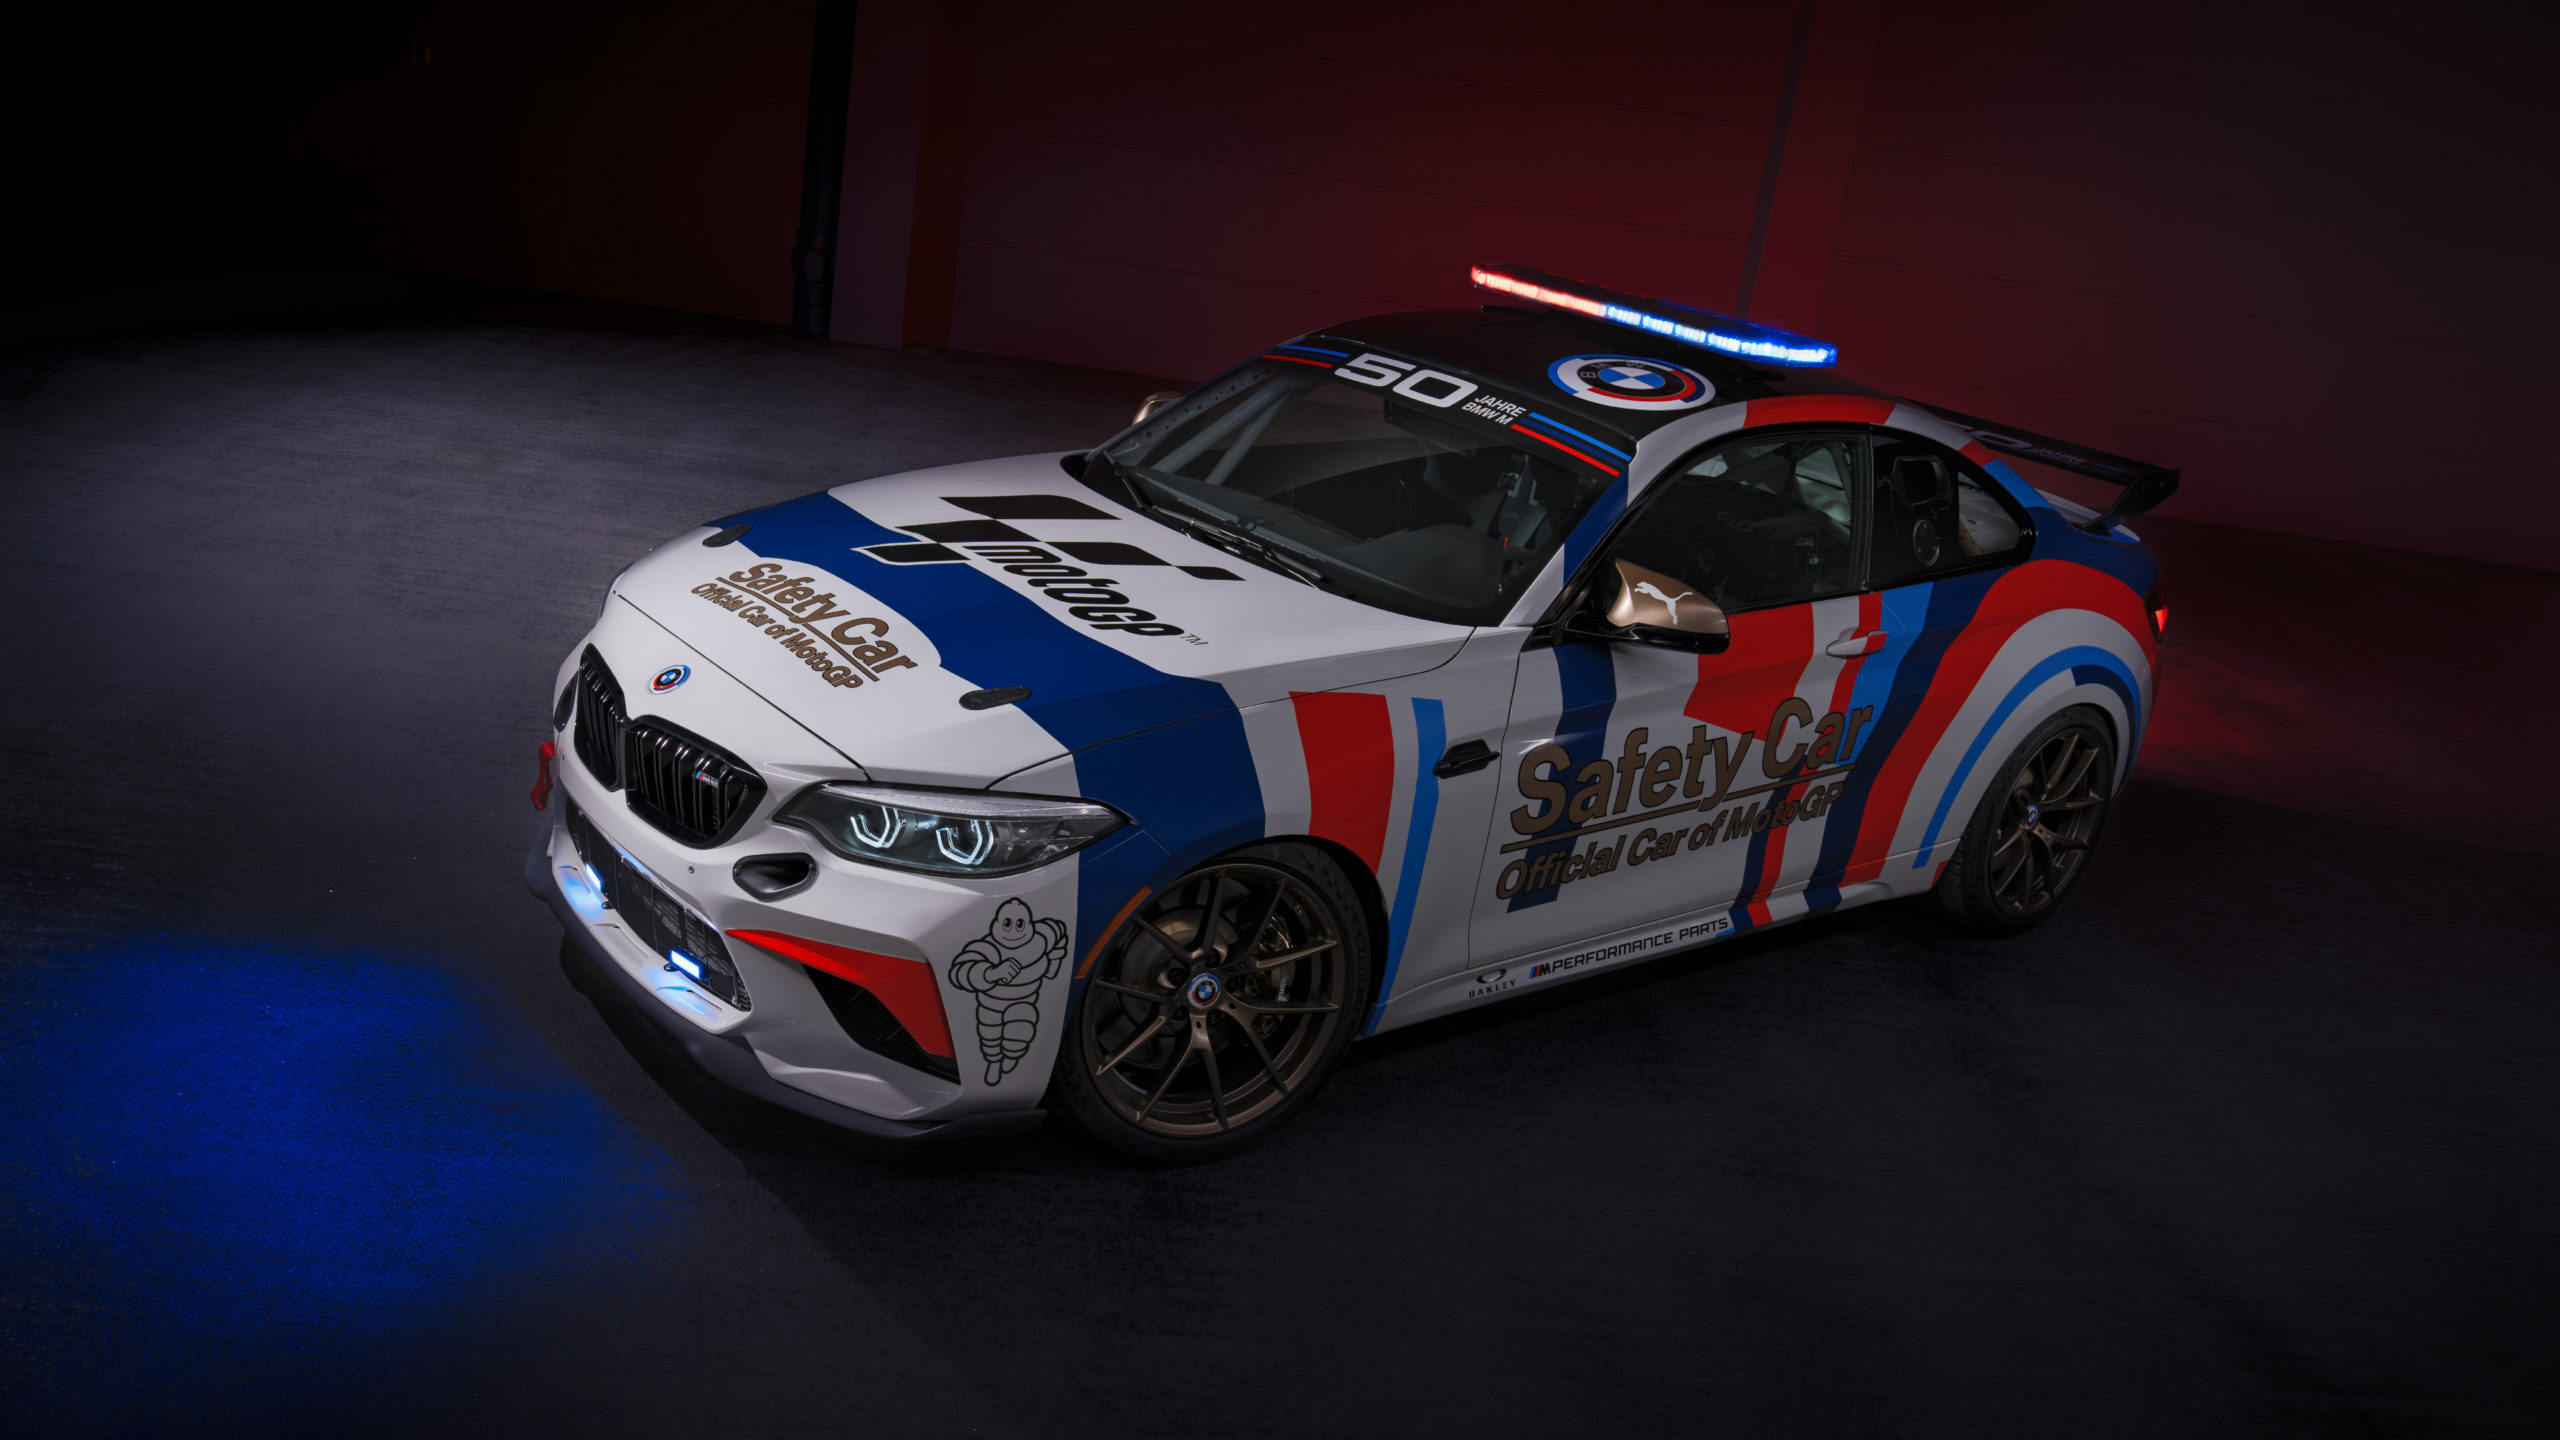 The new MotoGP safety car shows off all the M3 Touring M